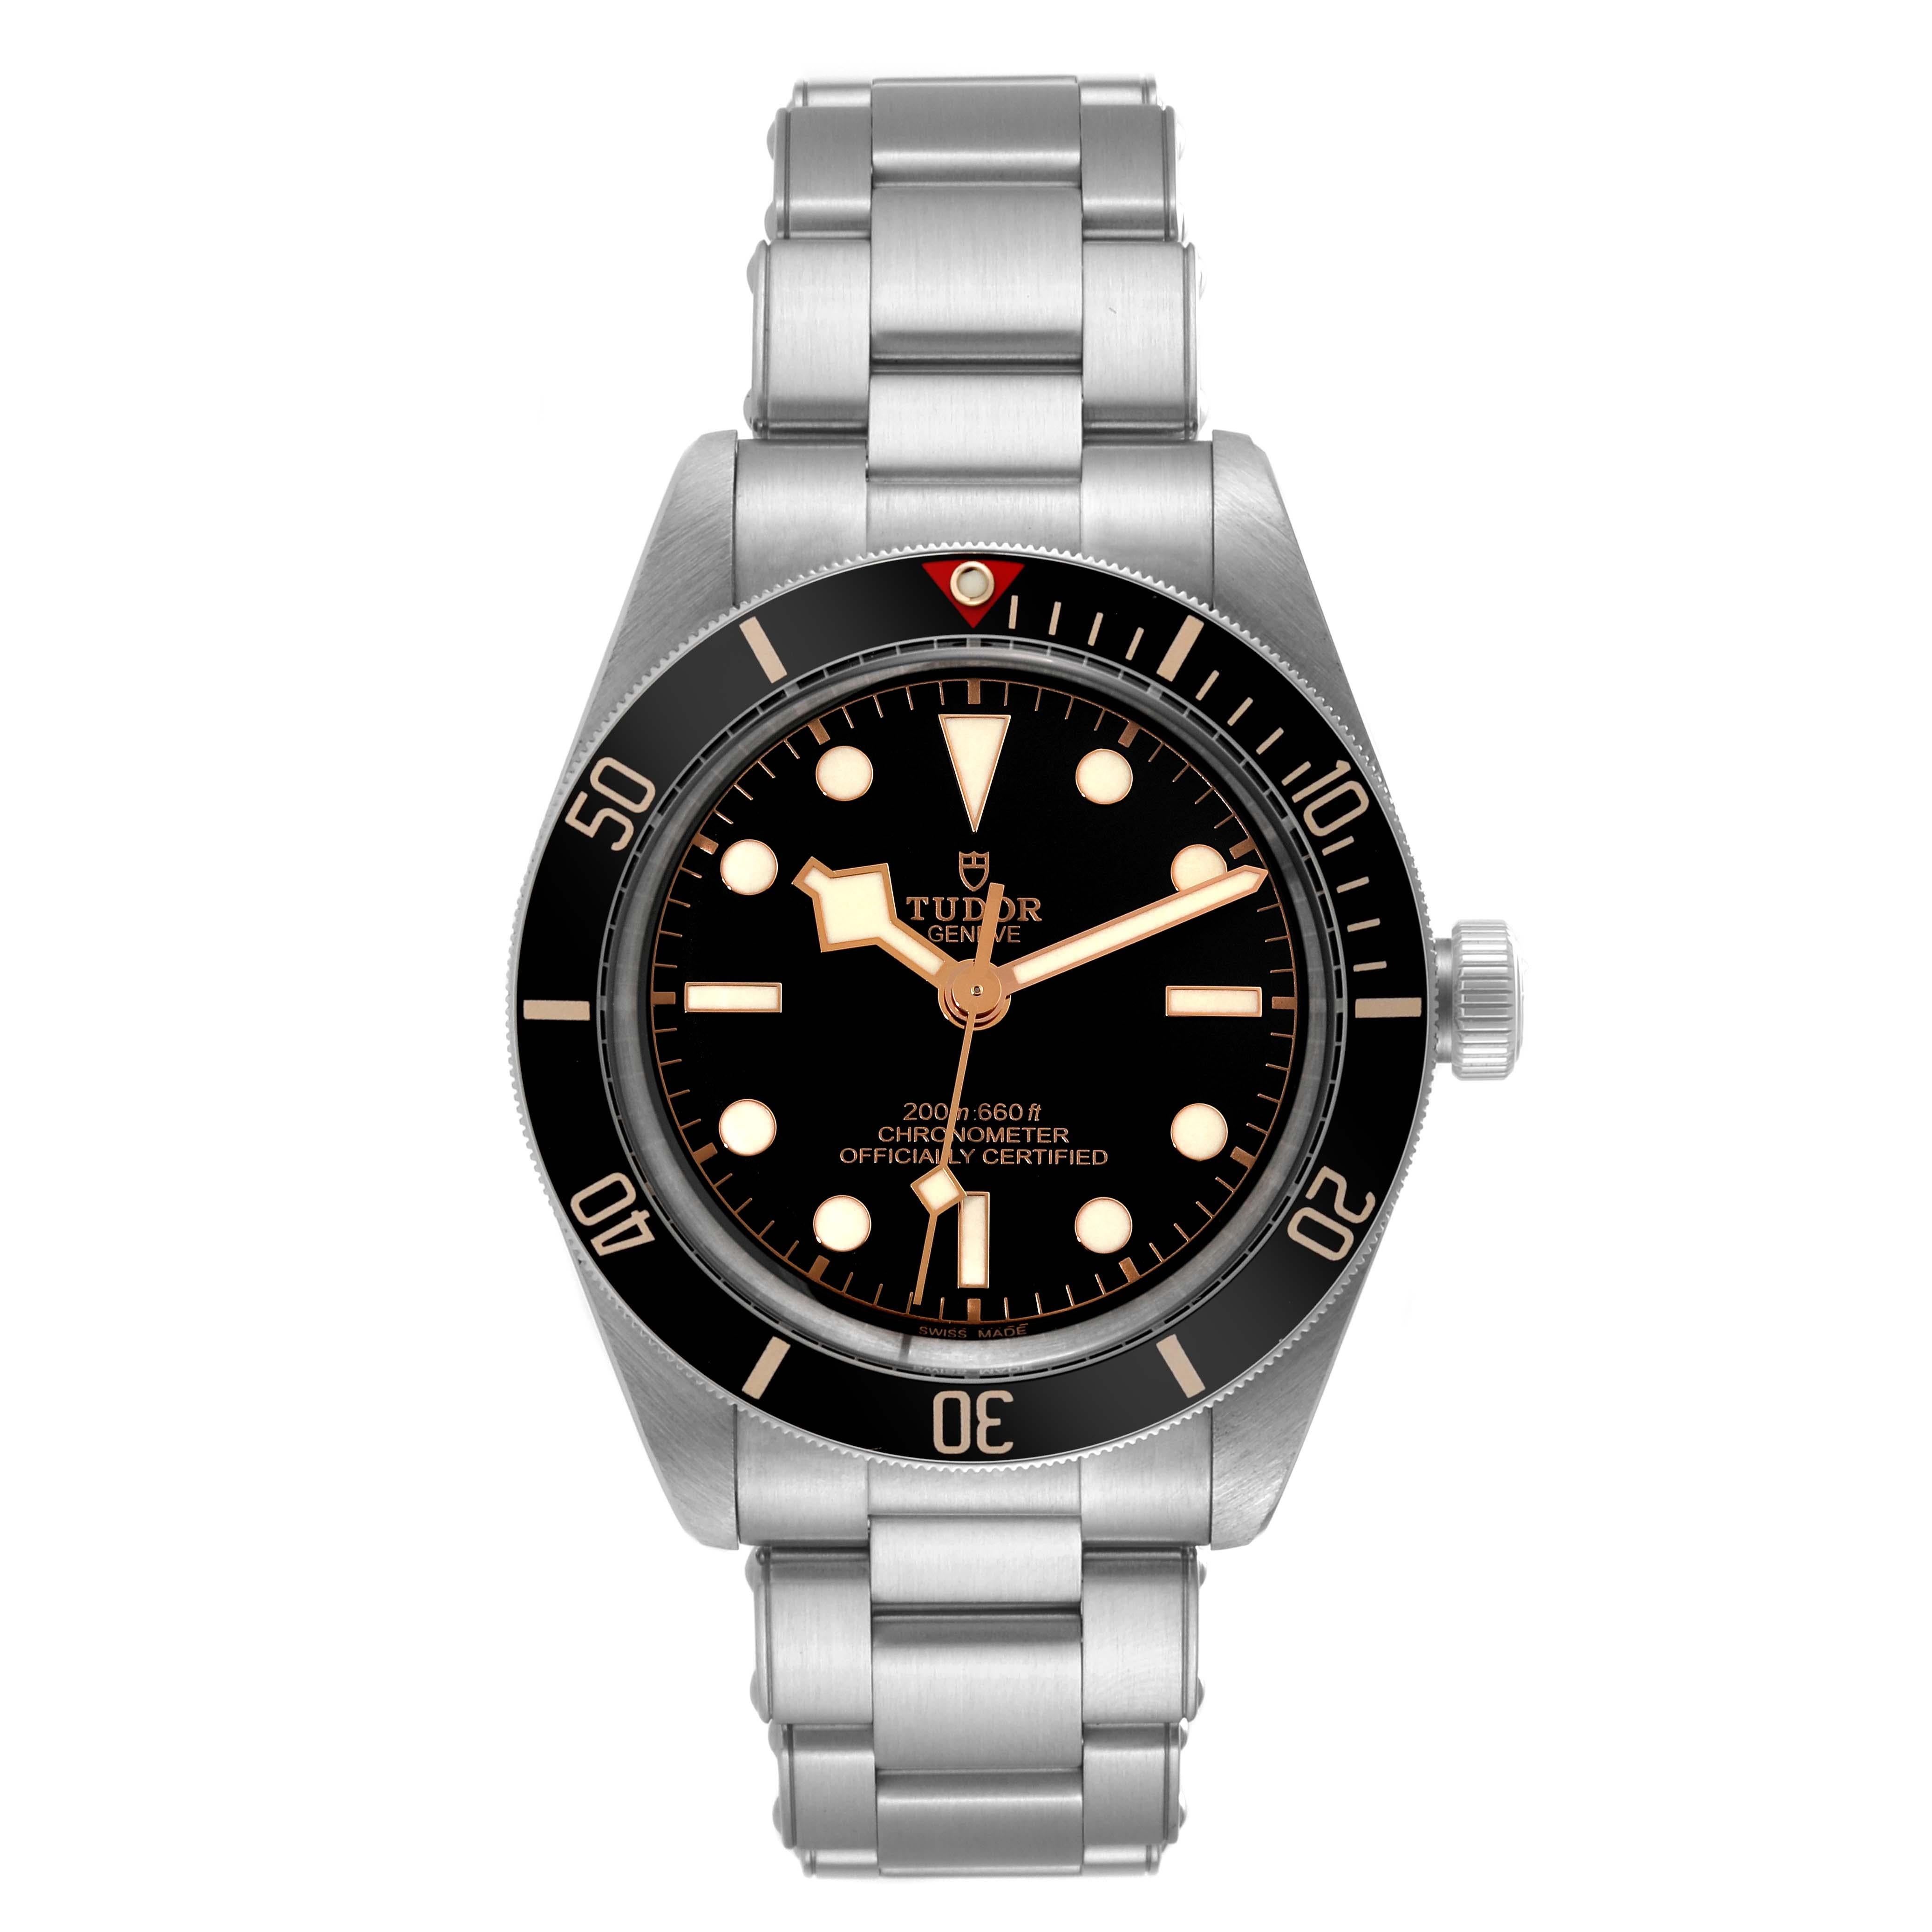 Tudor Black Bay Fifty Eight 39mm Black Dial Steel Mens Watch 79030 Box Card. Automatic self-winding movement. Stainless steel oyster case 39.0 mm in diameter. Tudor rose logo on the crown. Stainless steel uni-directional rotating bezel with black